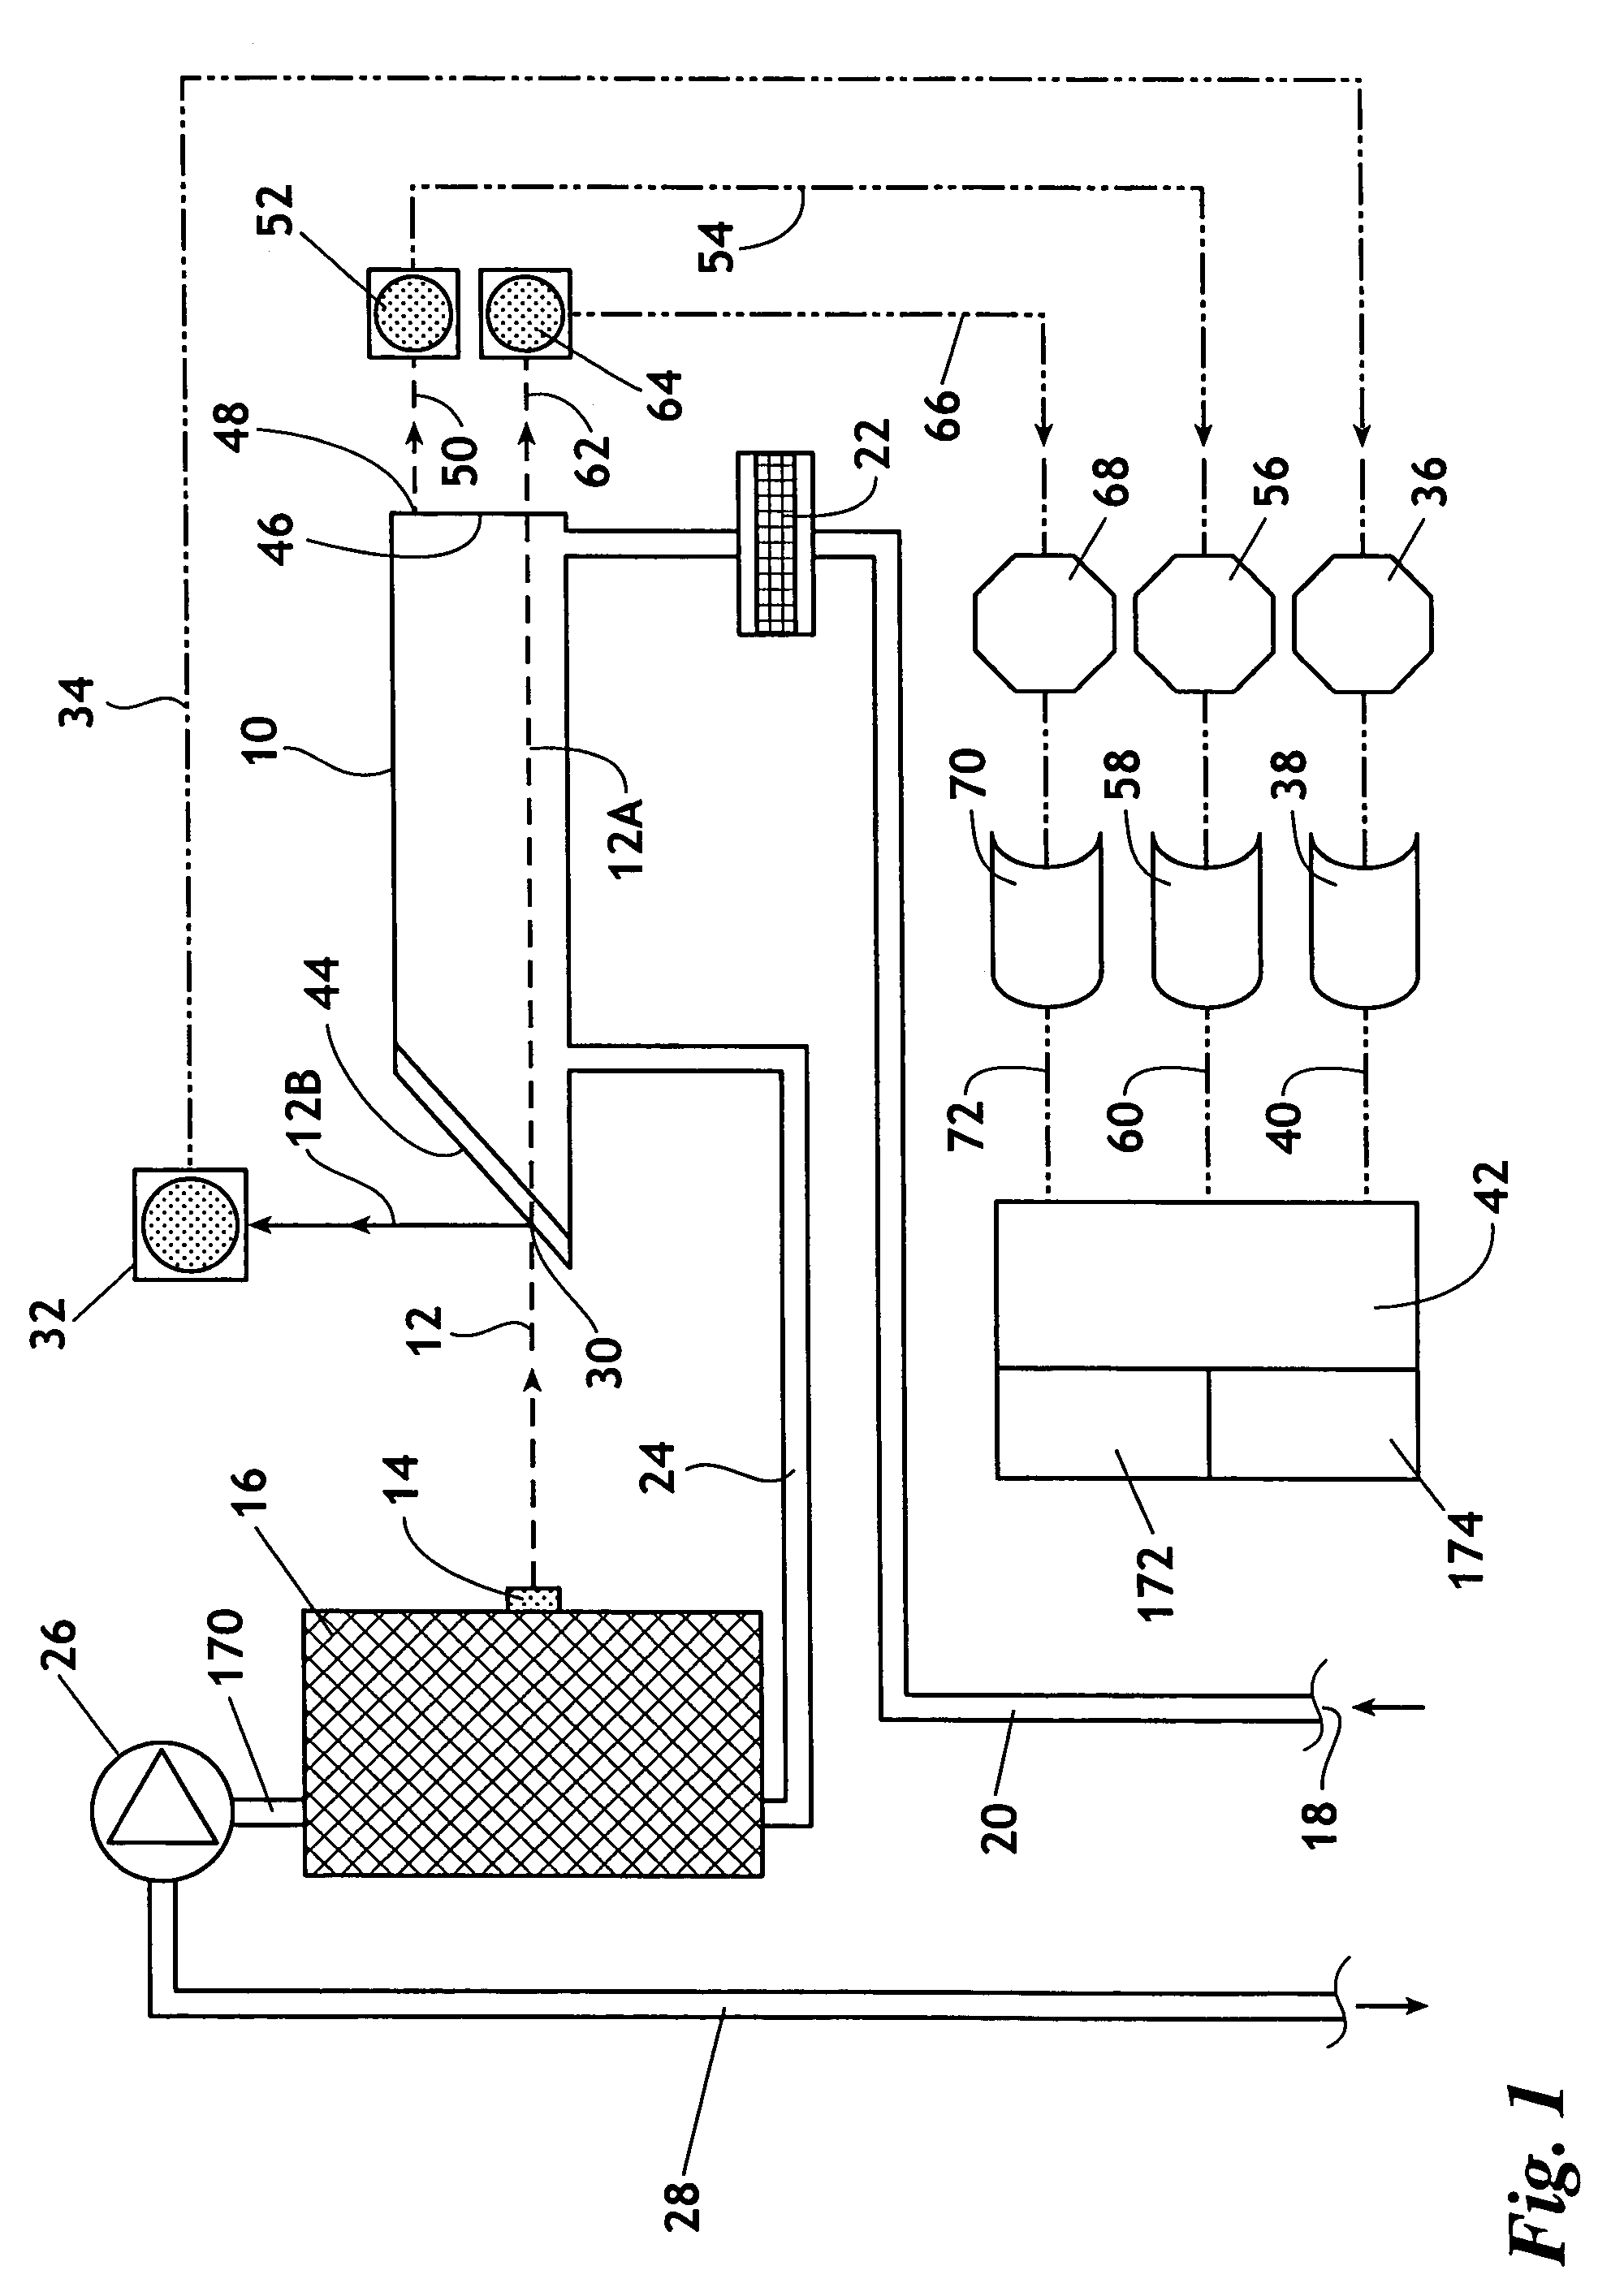 Method and device for detecting gases by absorption spectroscopy